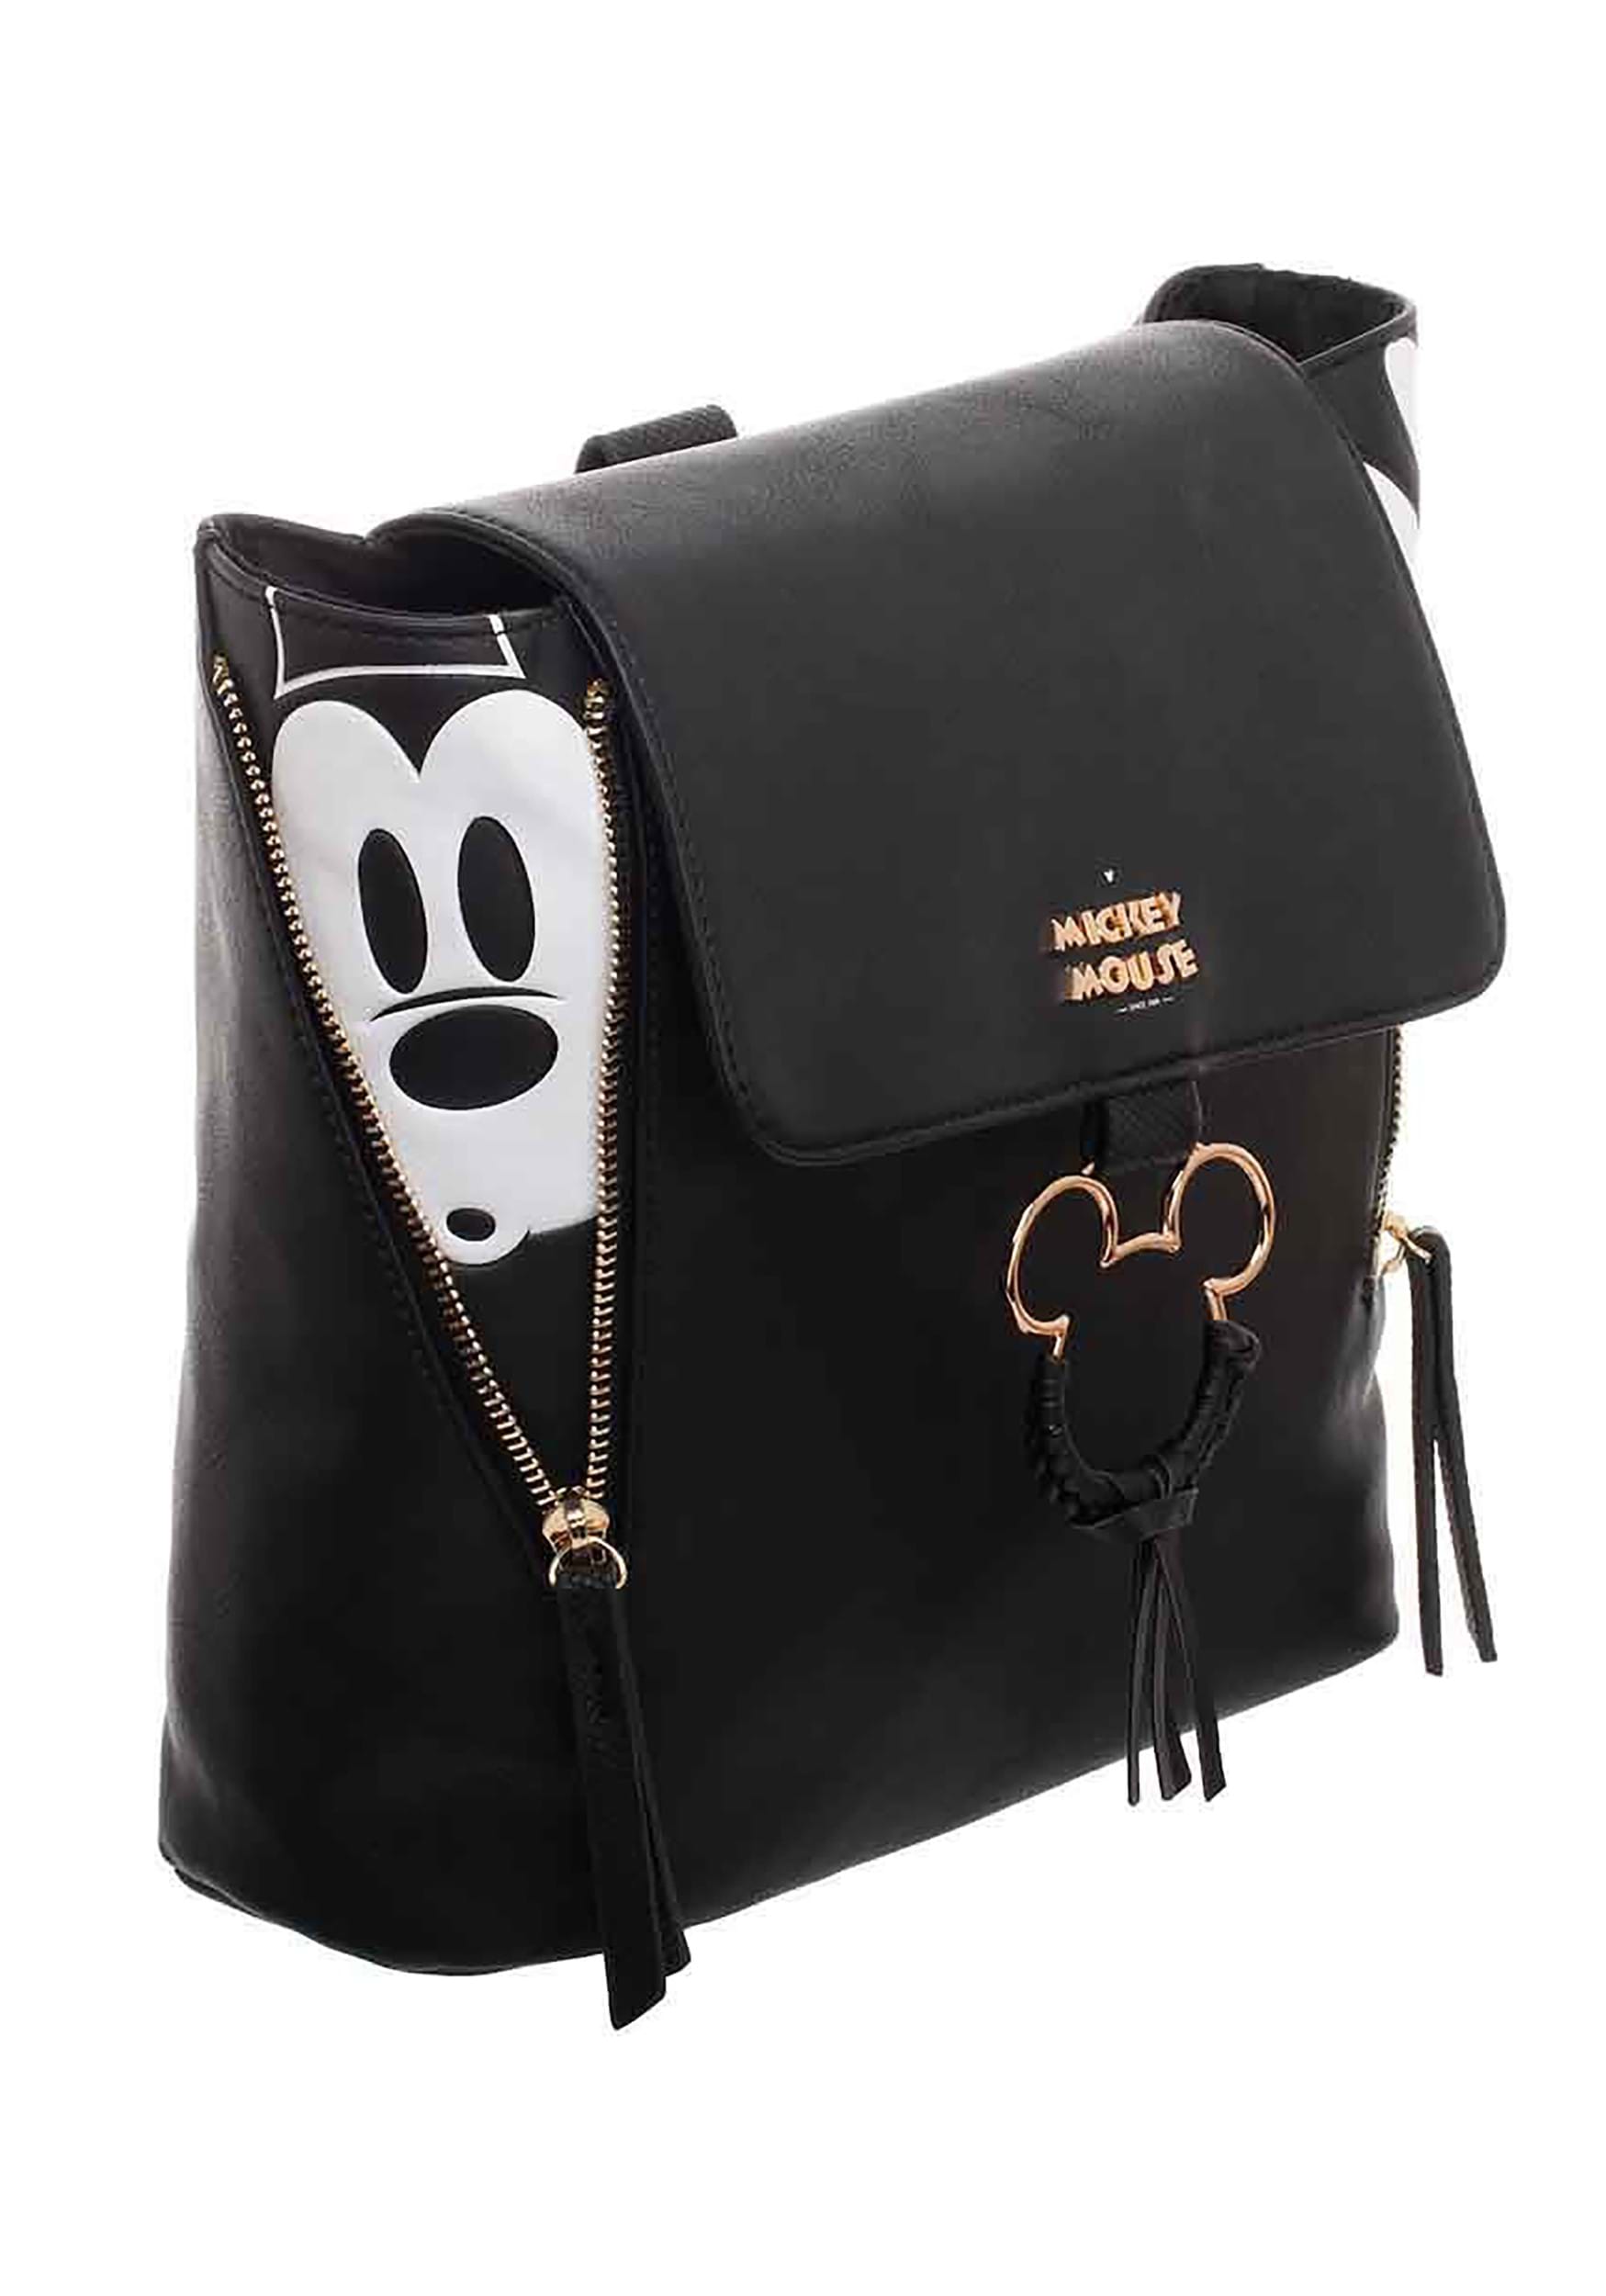 Mickey Mouse - Minnie Mouse Monogram 9” Faux Leather Flap Mini Backpack by  Danielle Nicole | Popcultcha